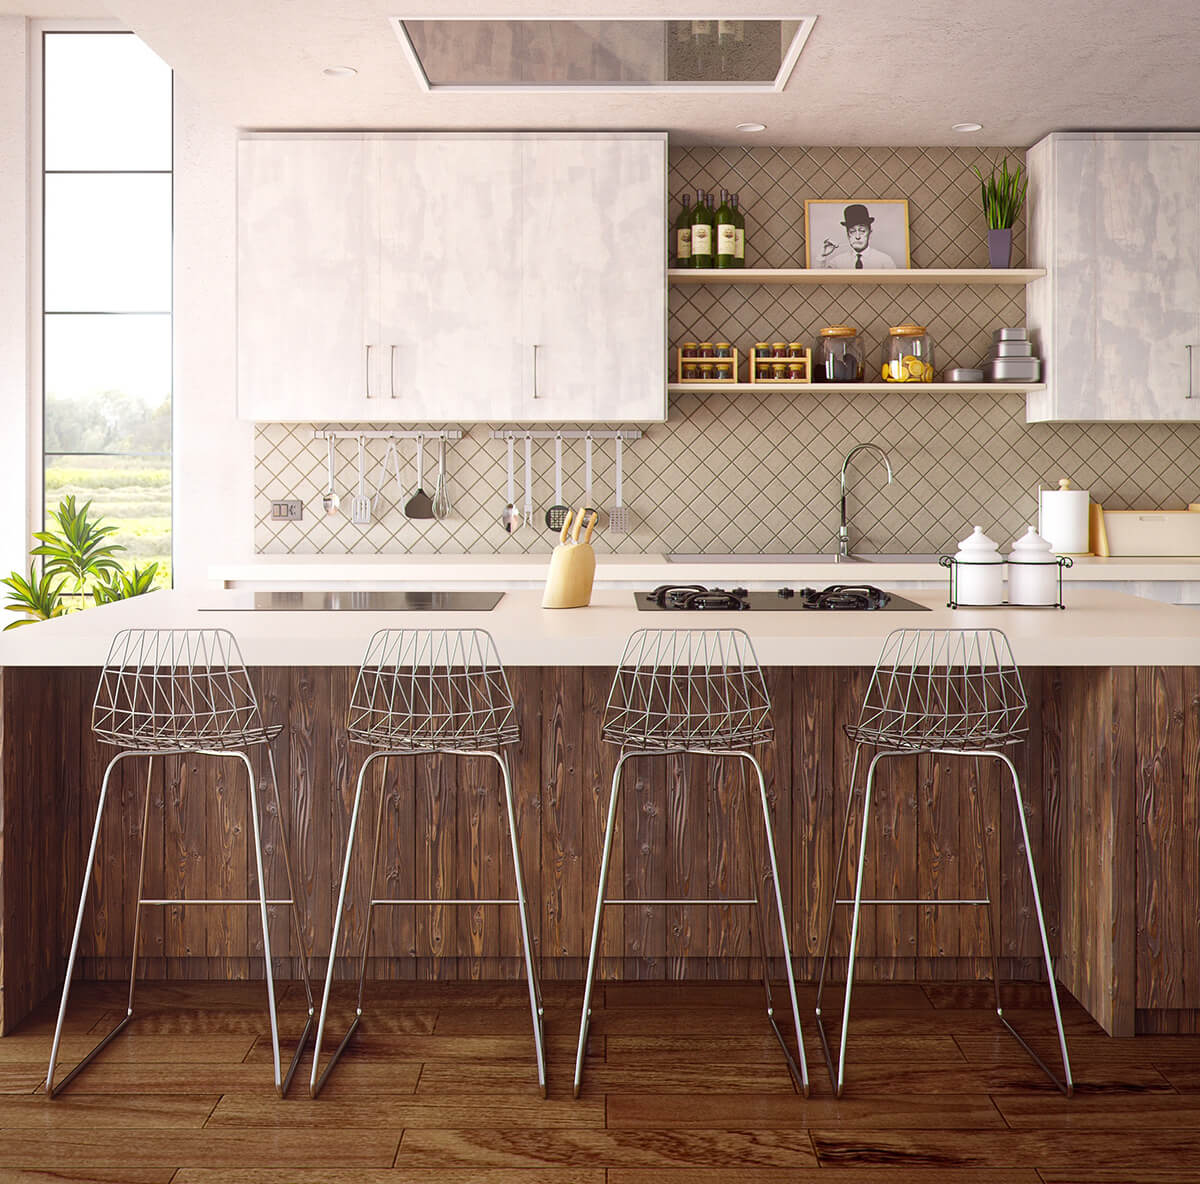 How to Choose Right Porcelain Tiles for Your Lovely Kitchen Wall?